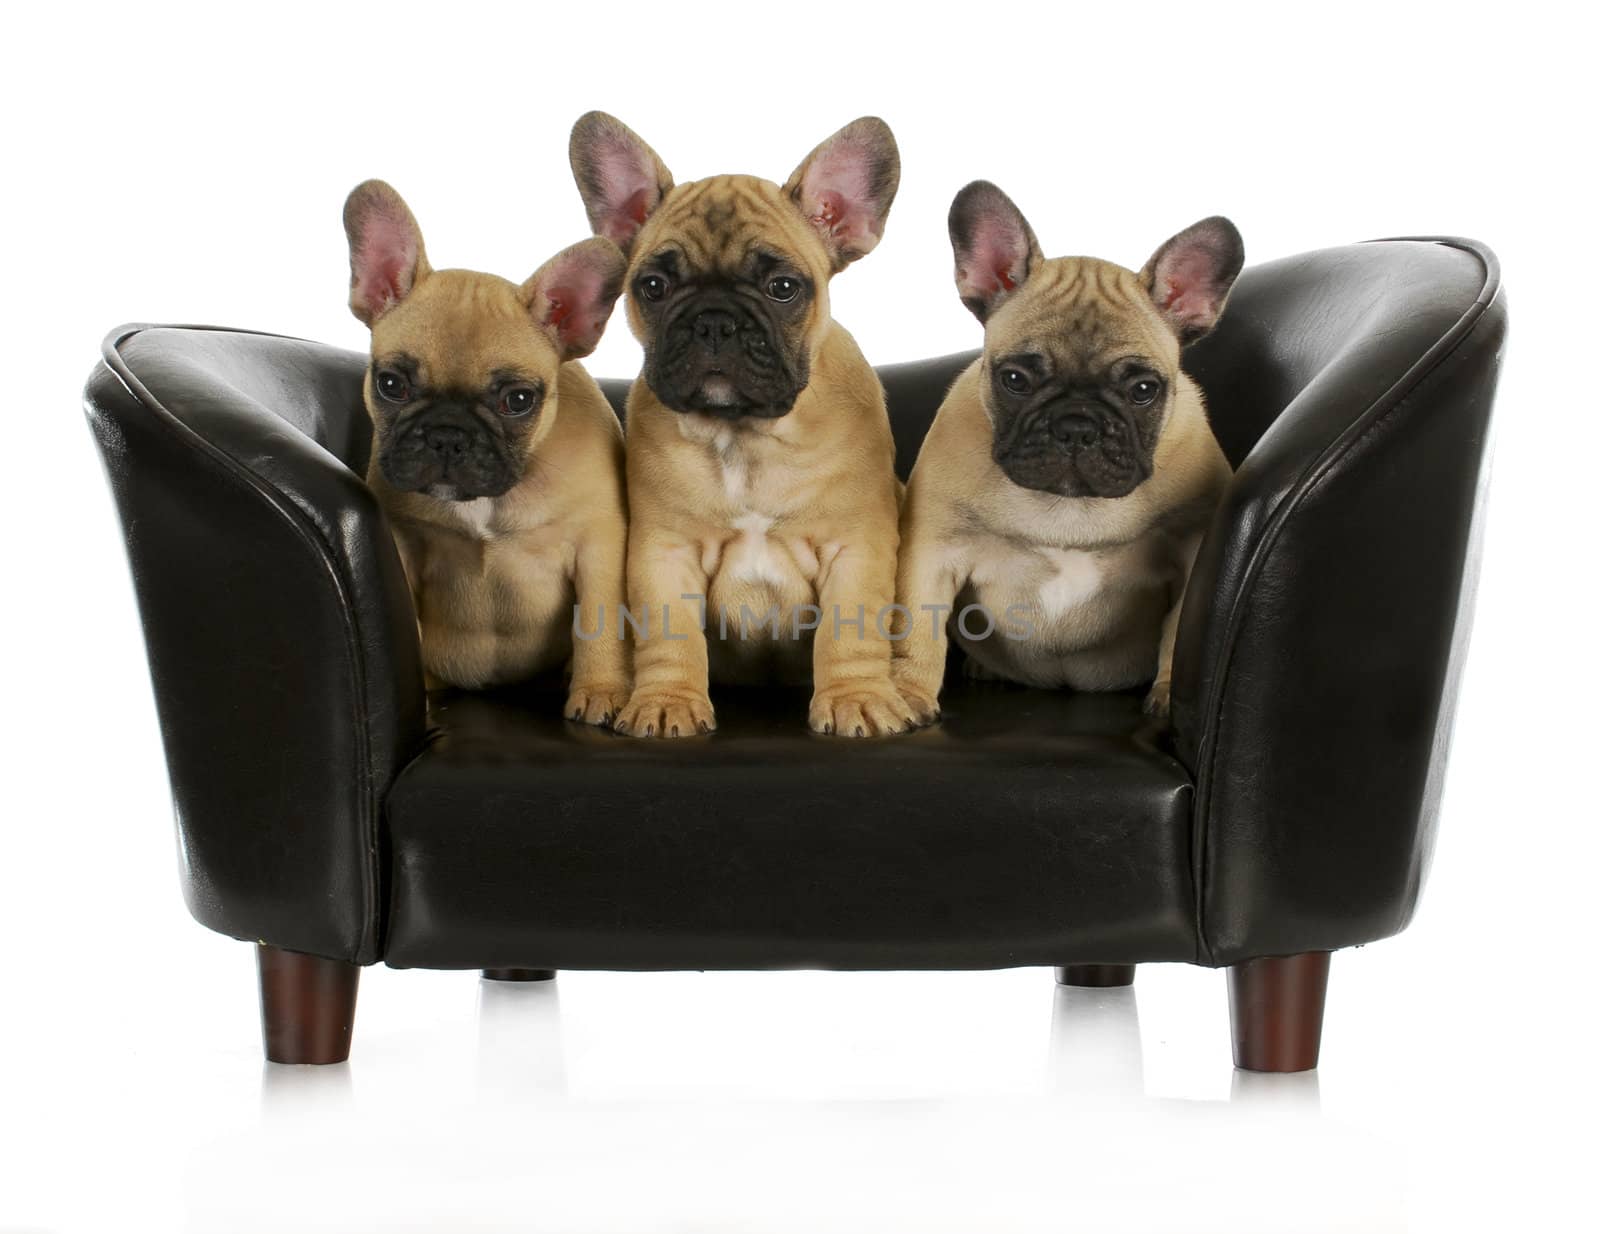 french bulldog litter - three frenchies sitting on a dog couch isolated on white background